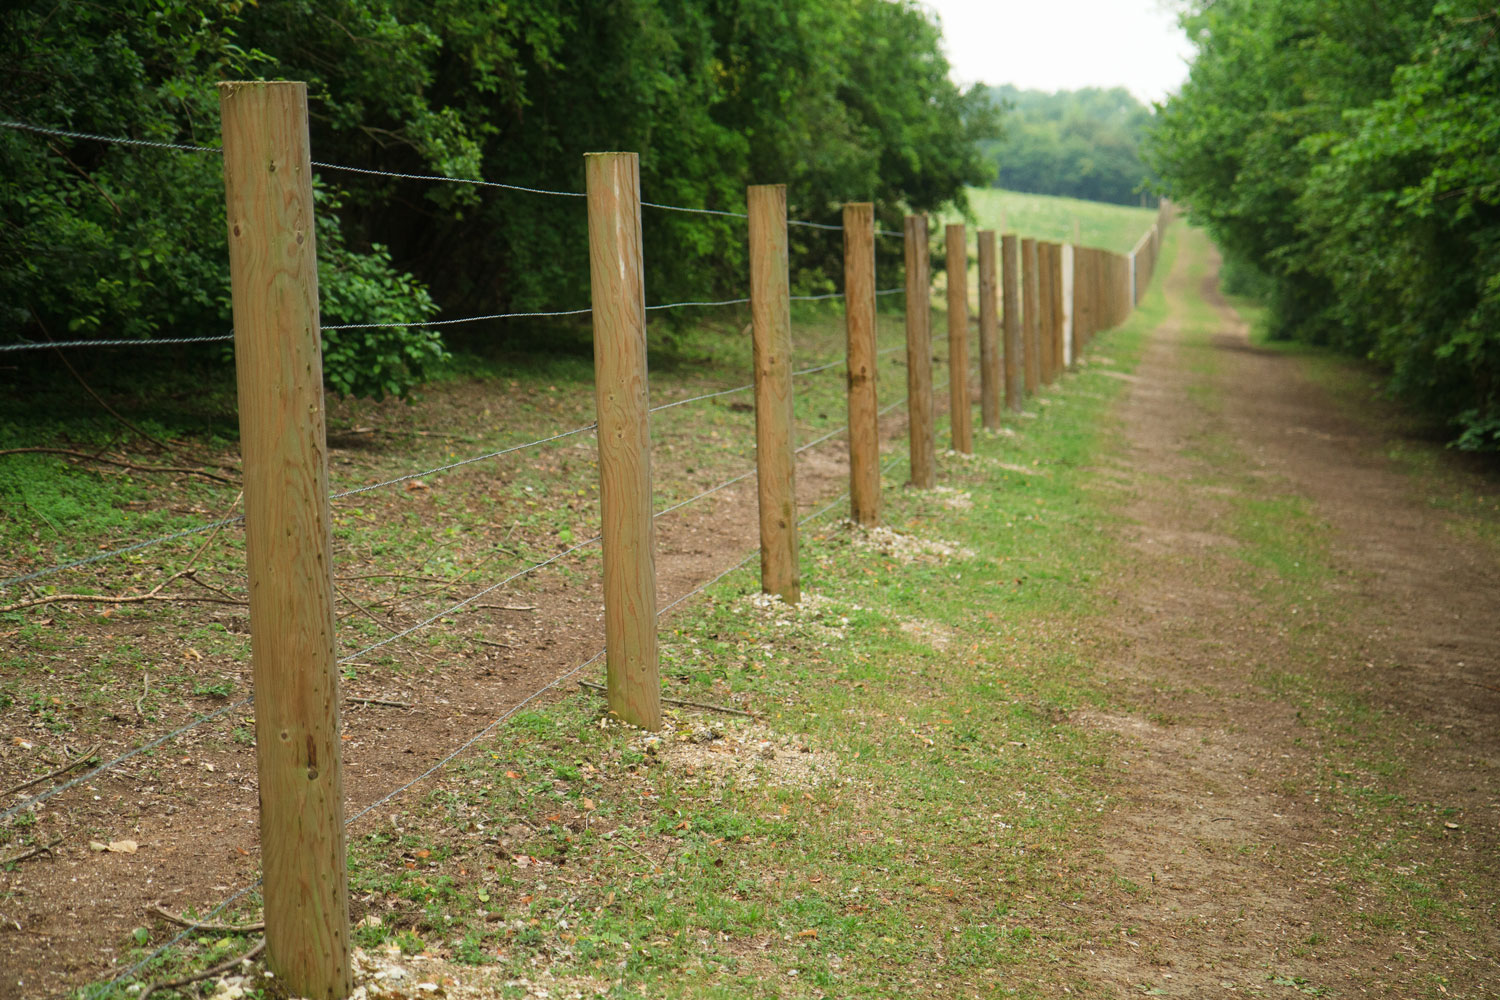 A long line of fence posts with barb wires